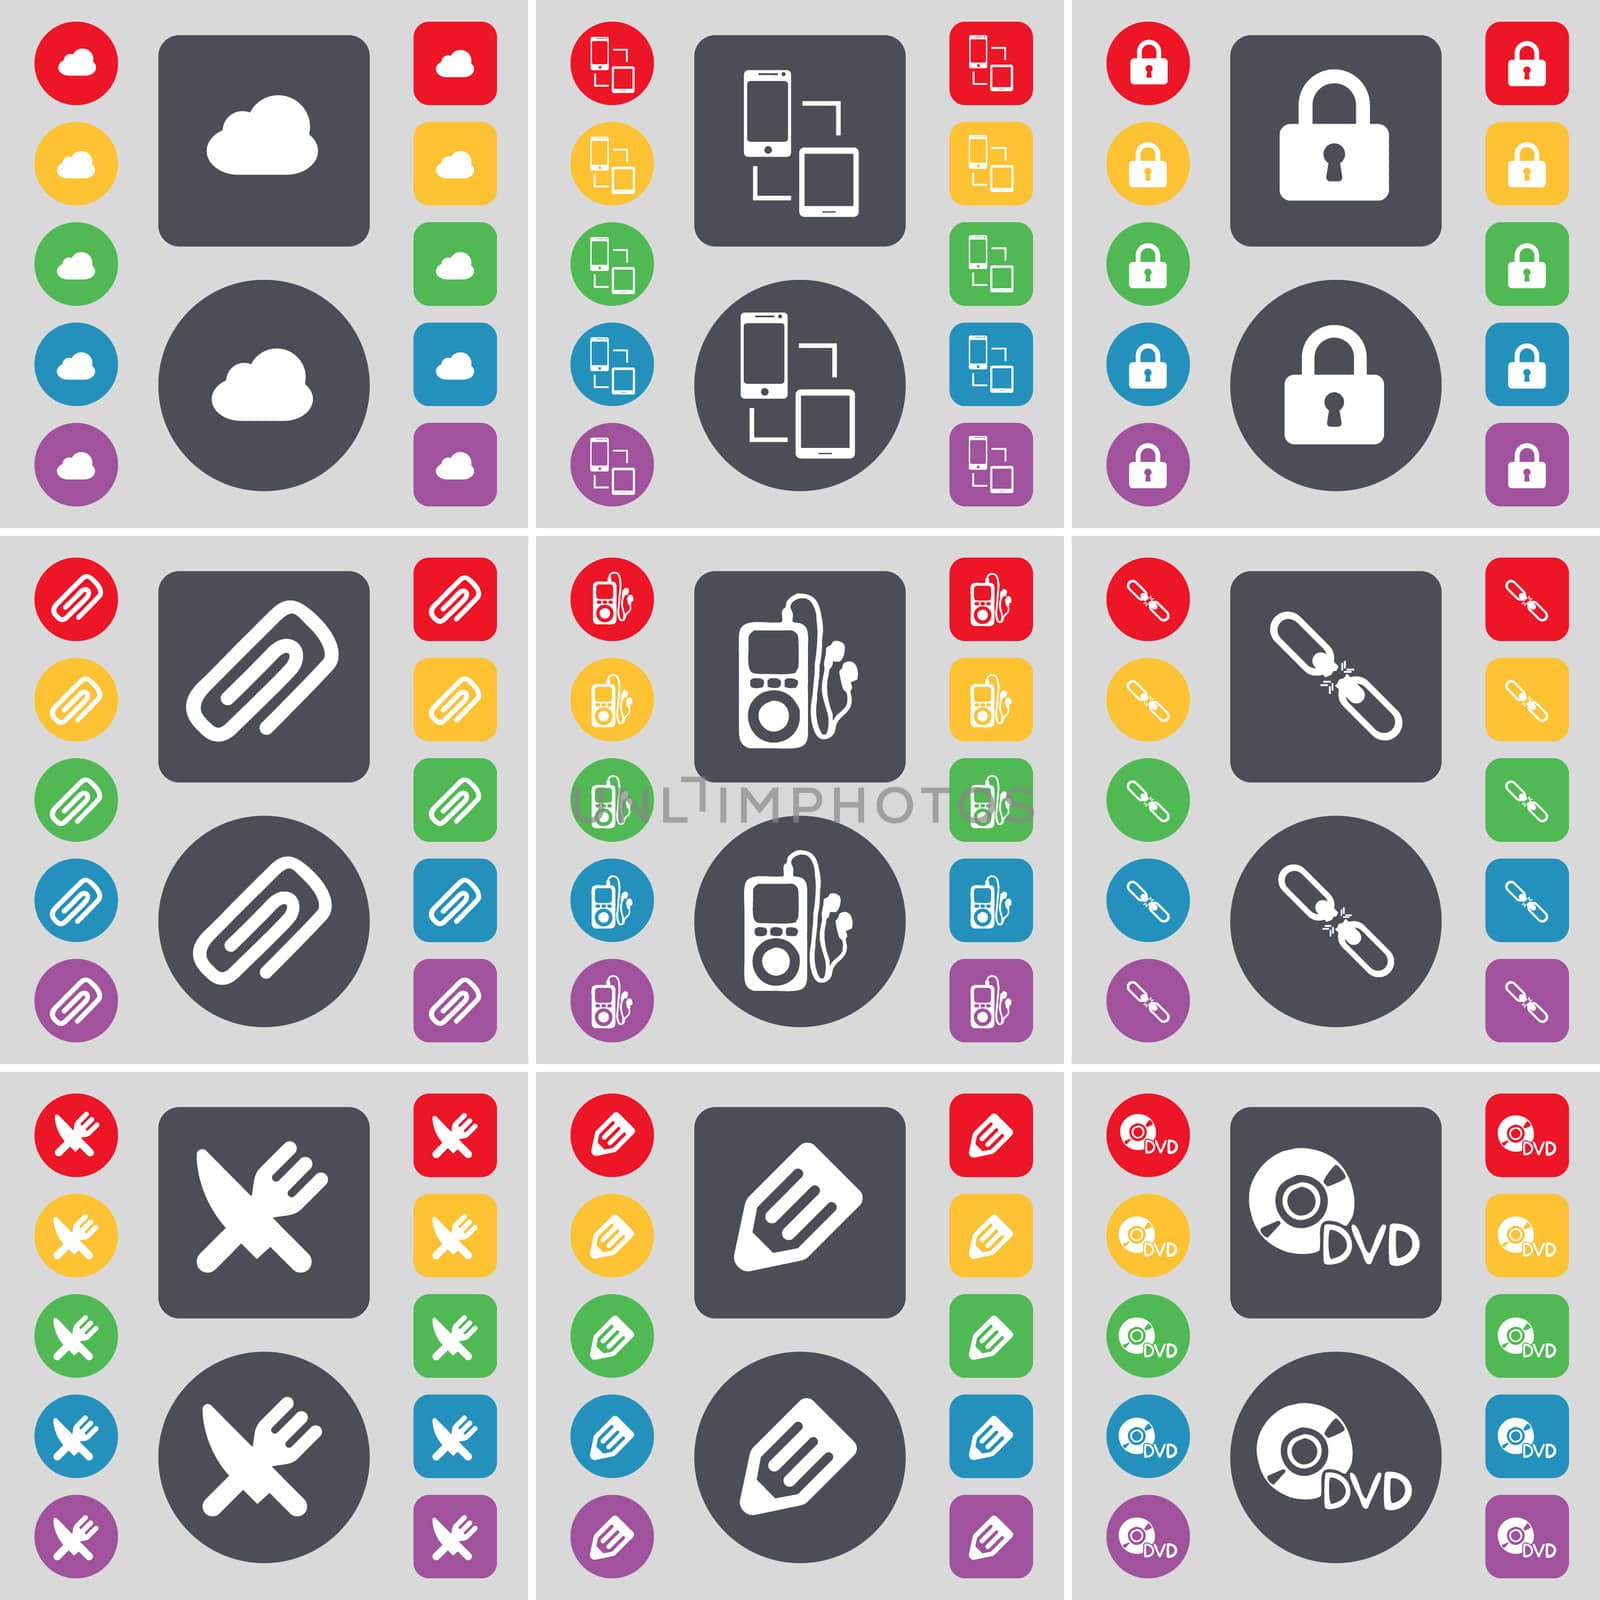 Cloud, Connection, Lock, Clip, MP3 player, Link, Fork and knife, Pencil, DVD icon symbol. A large set of flat, colored buttons for your design.  by serhii_lohvyniuk